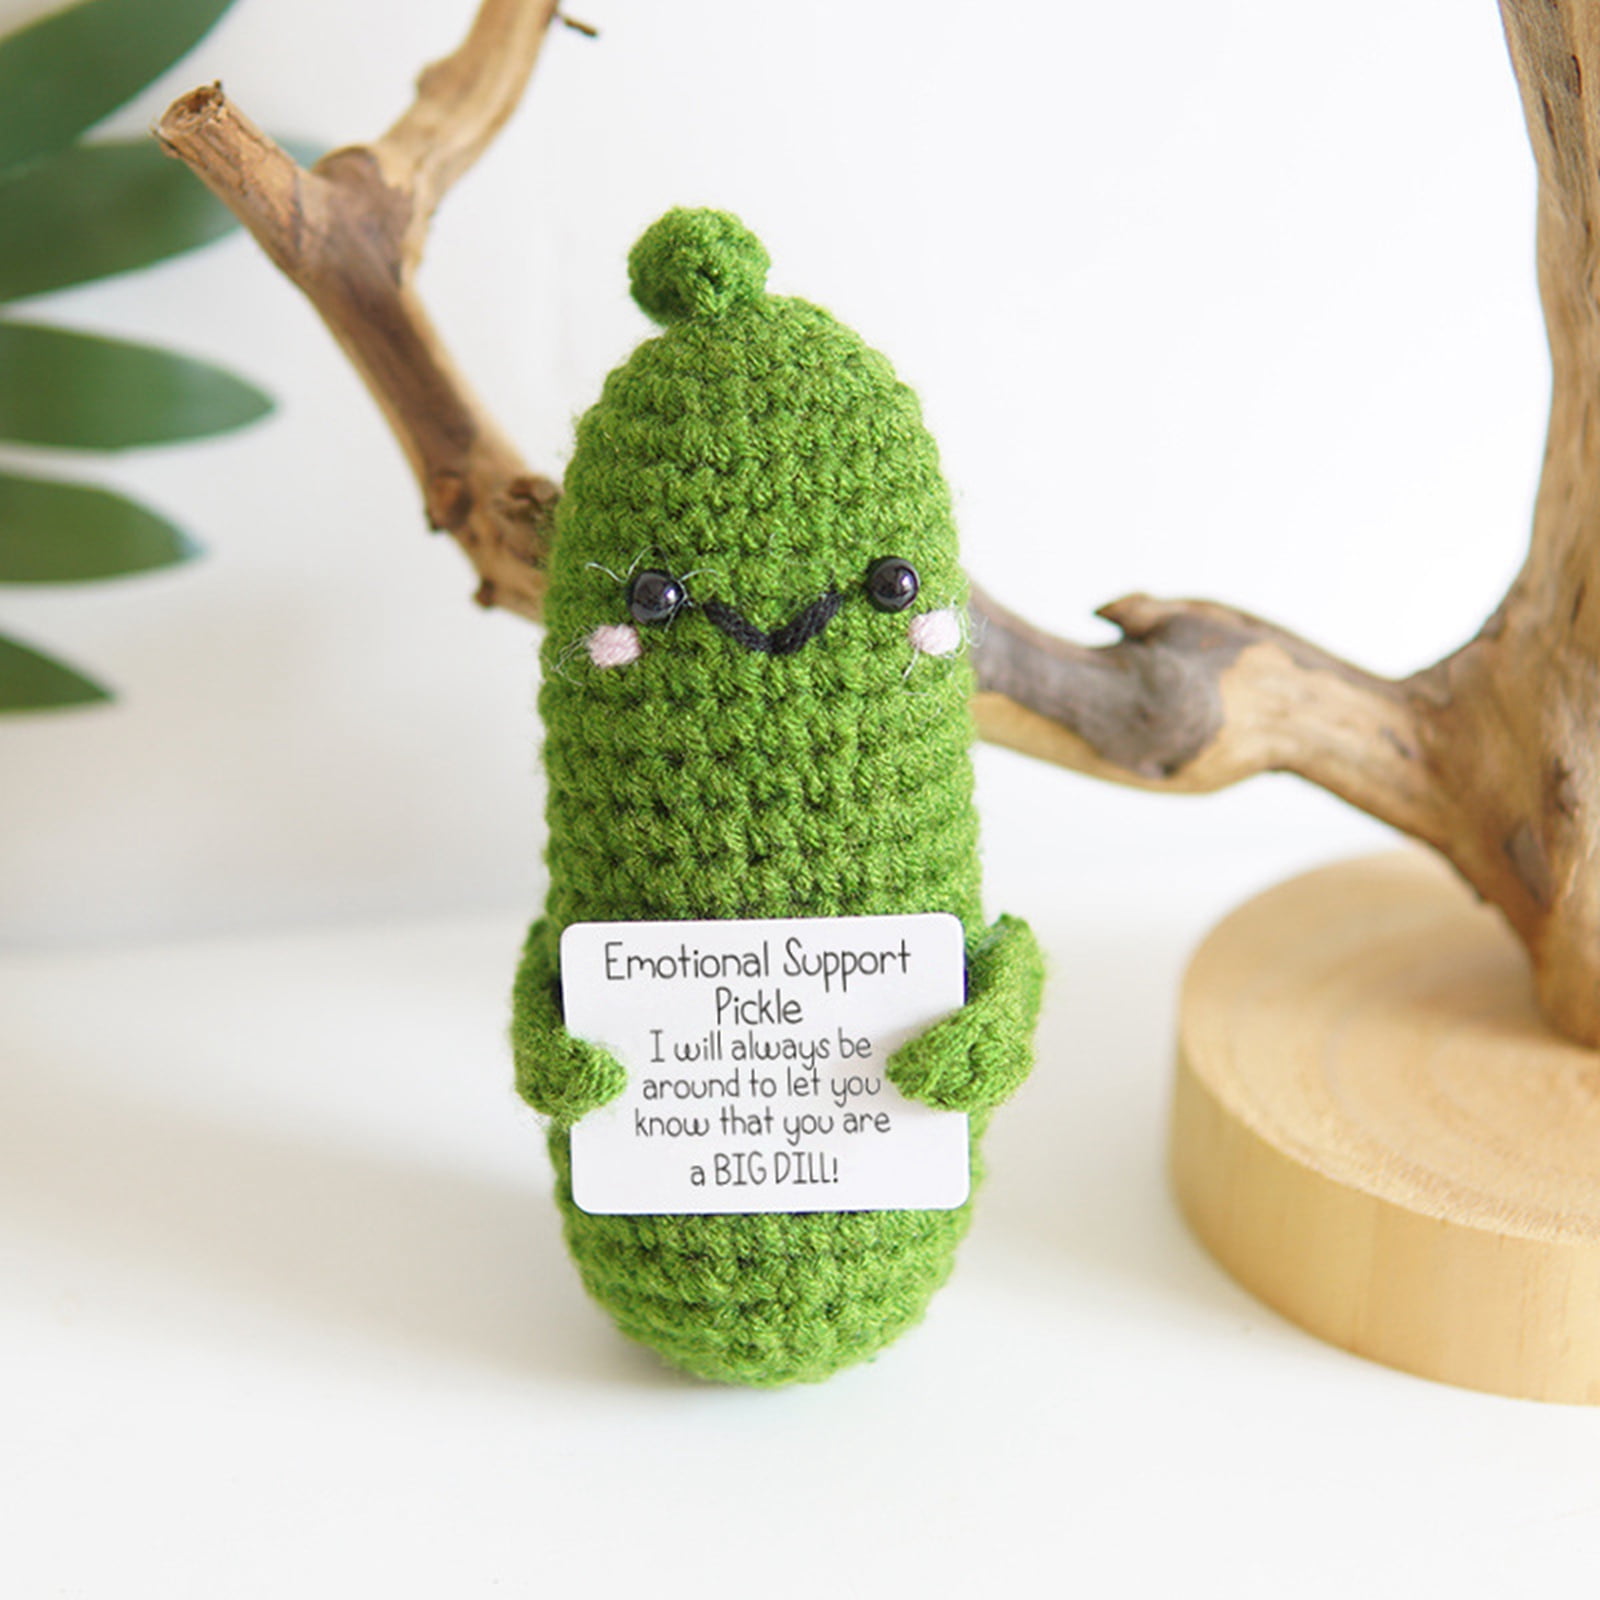 Positive Energy Potato Pickle Corn Doll Hand Stitched Handmade Plush Wool  Knitting Doll With Card Funny Christams Gift Home Room Decor From  Timelessdream, $4.49